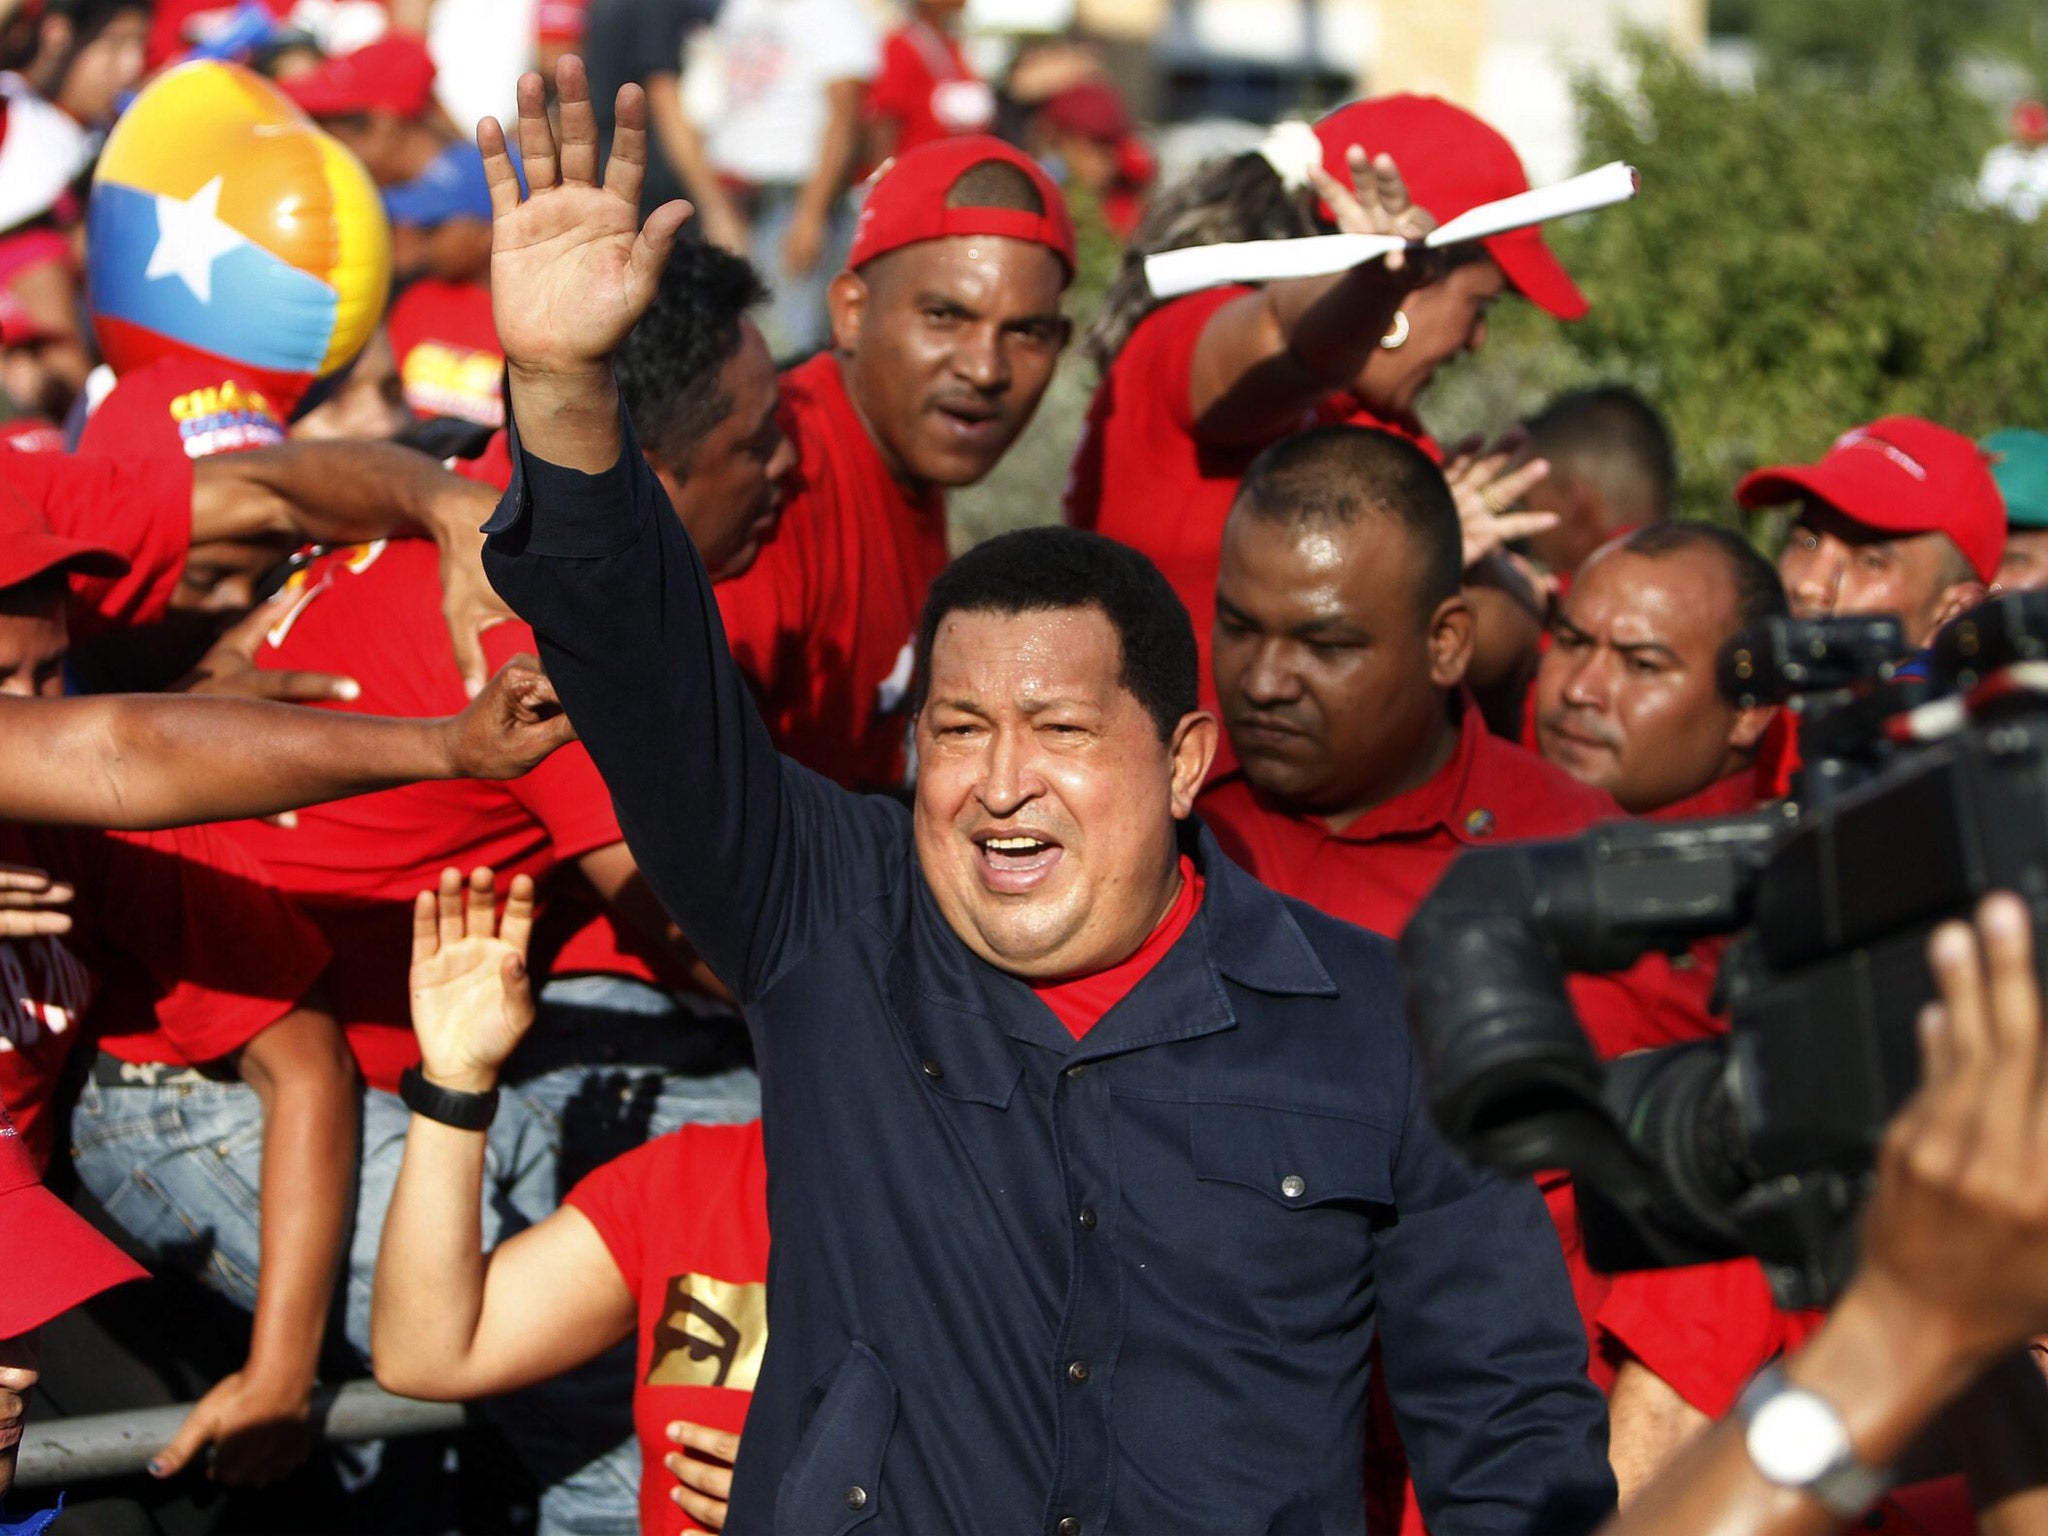 Chavez at an electoral event in Charallave, Venezuela, last September